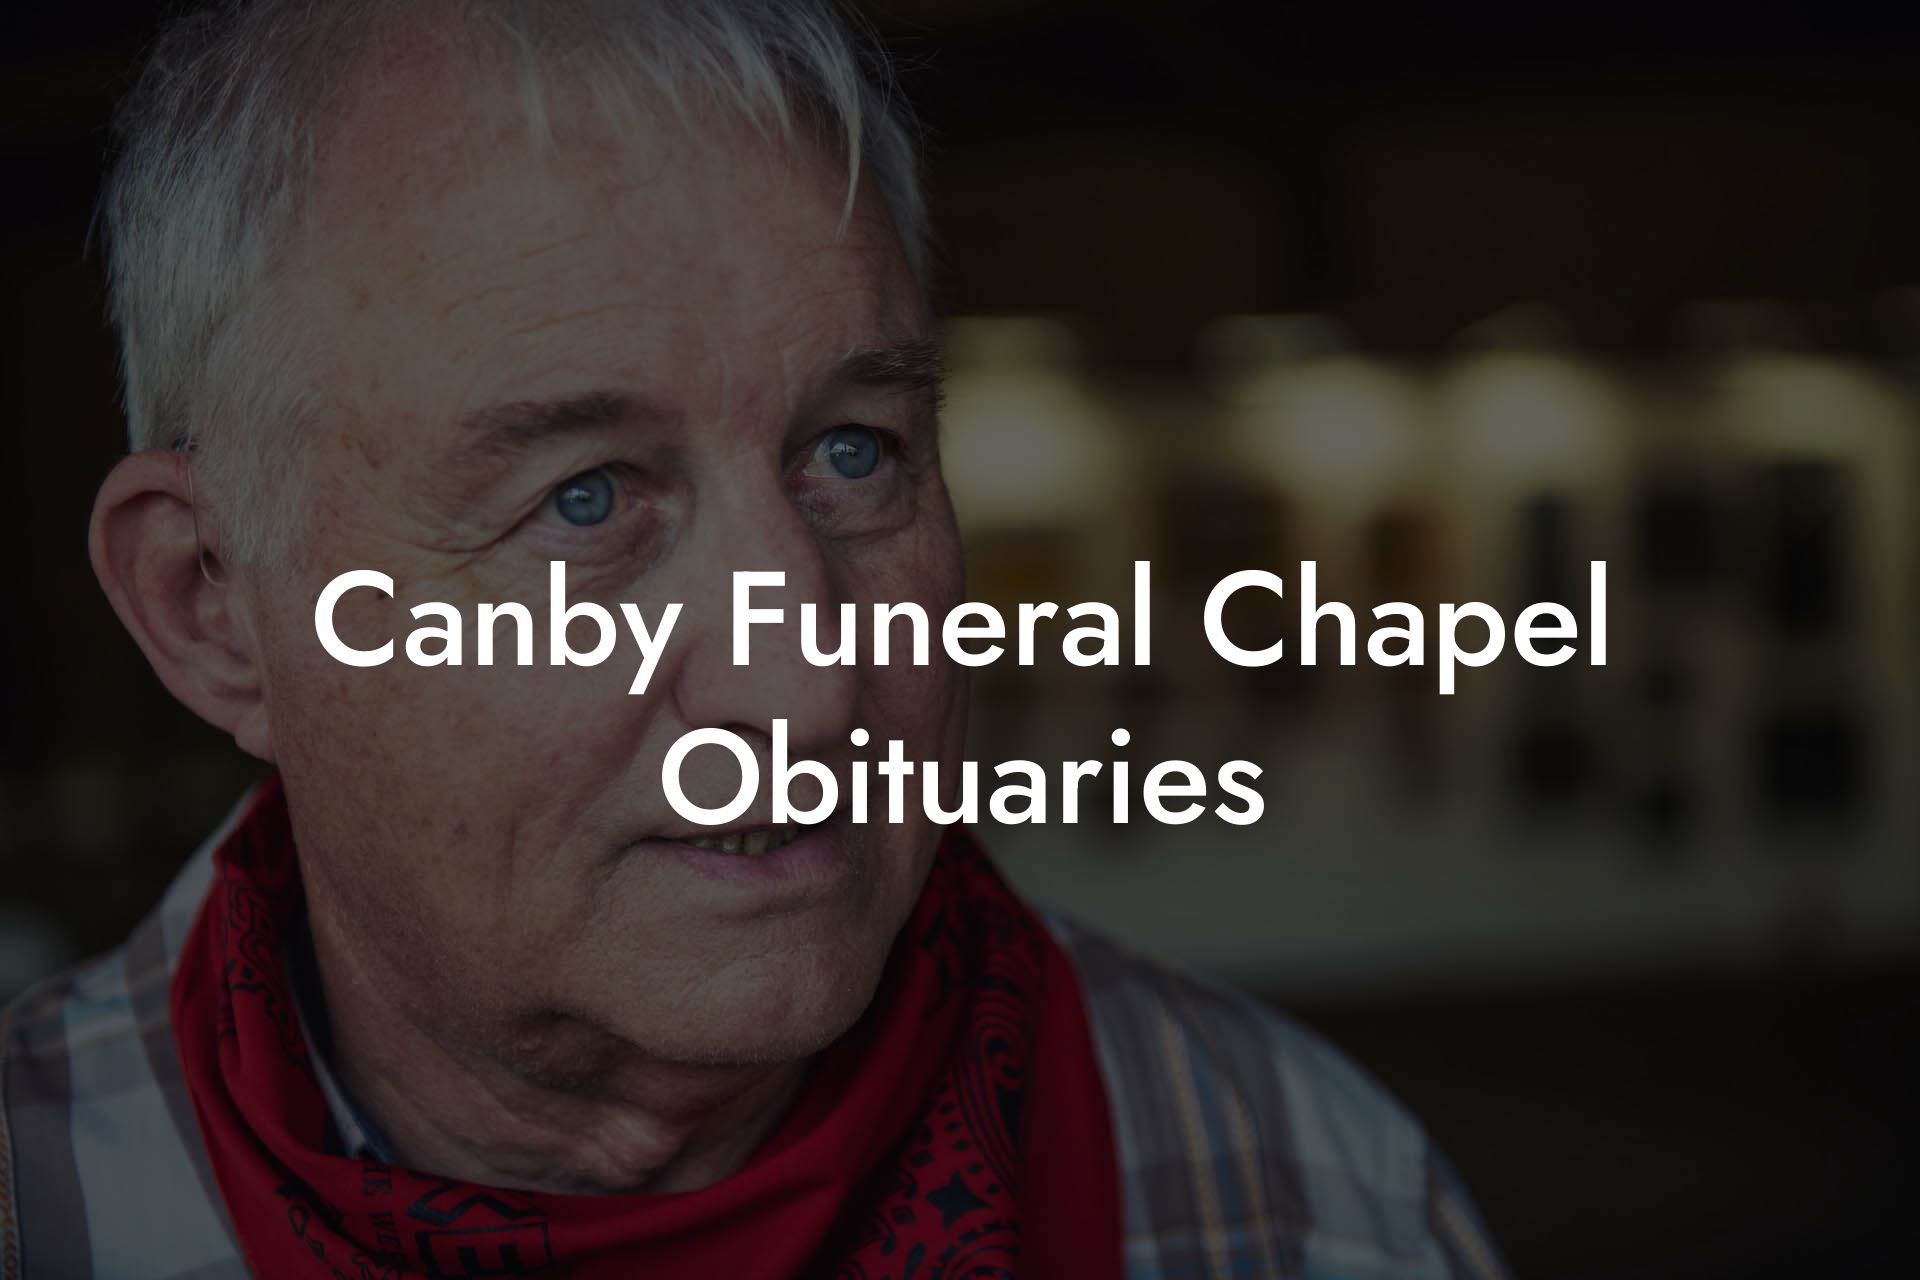 Canby Funeral Chapel Obituaries